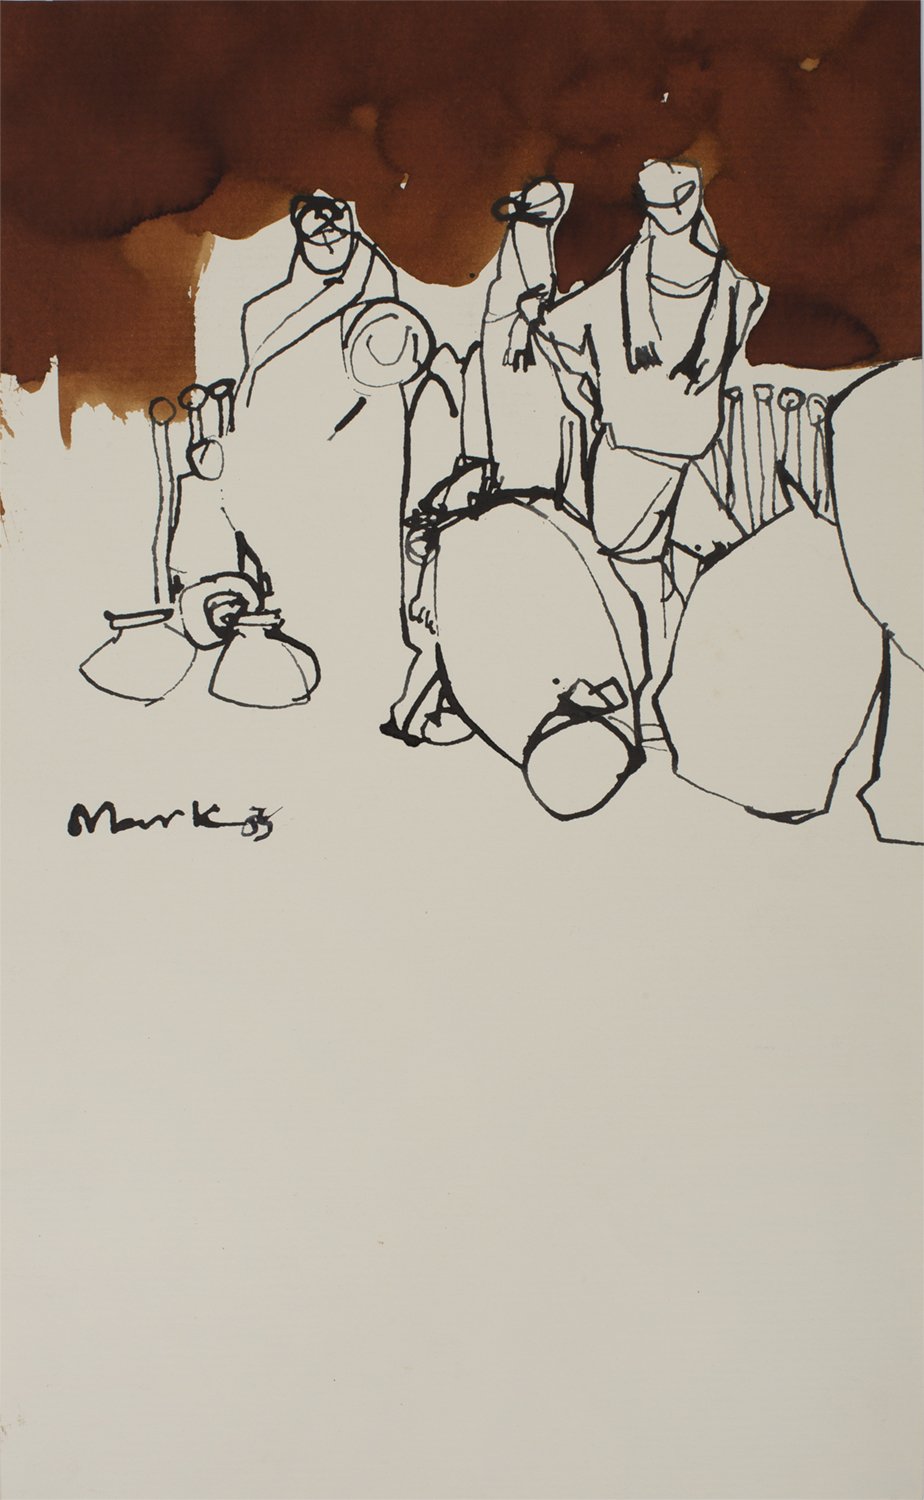 Market II|S. Mark Rathinaraj- Pen and Ink on Paper, , 20 x 11.5 inches